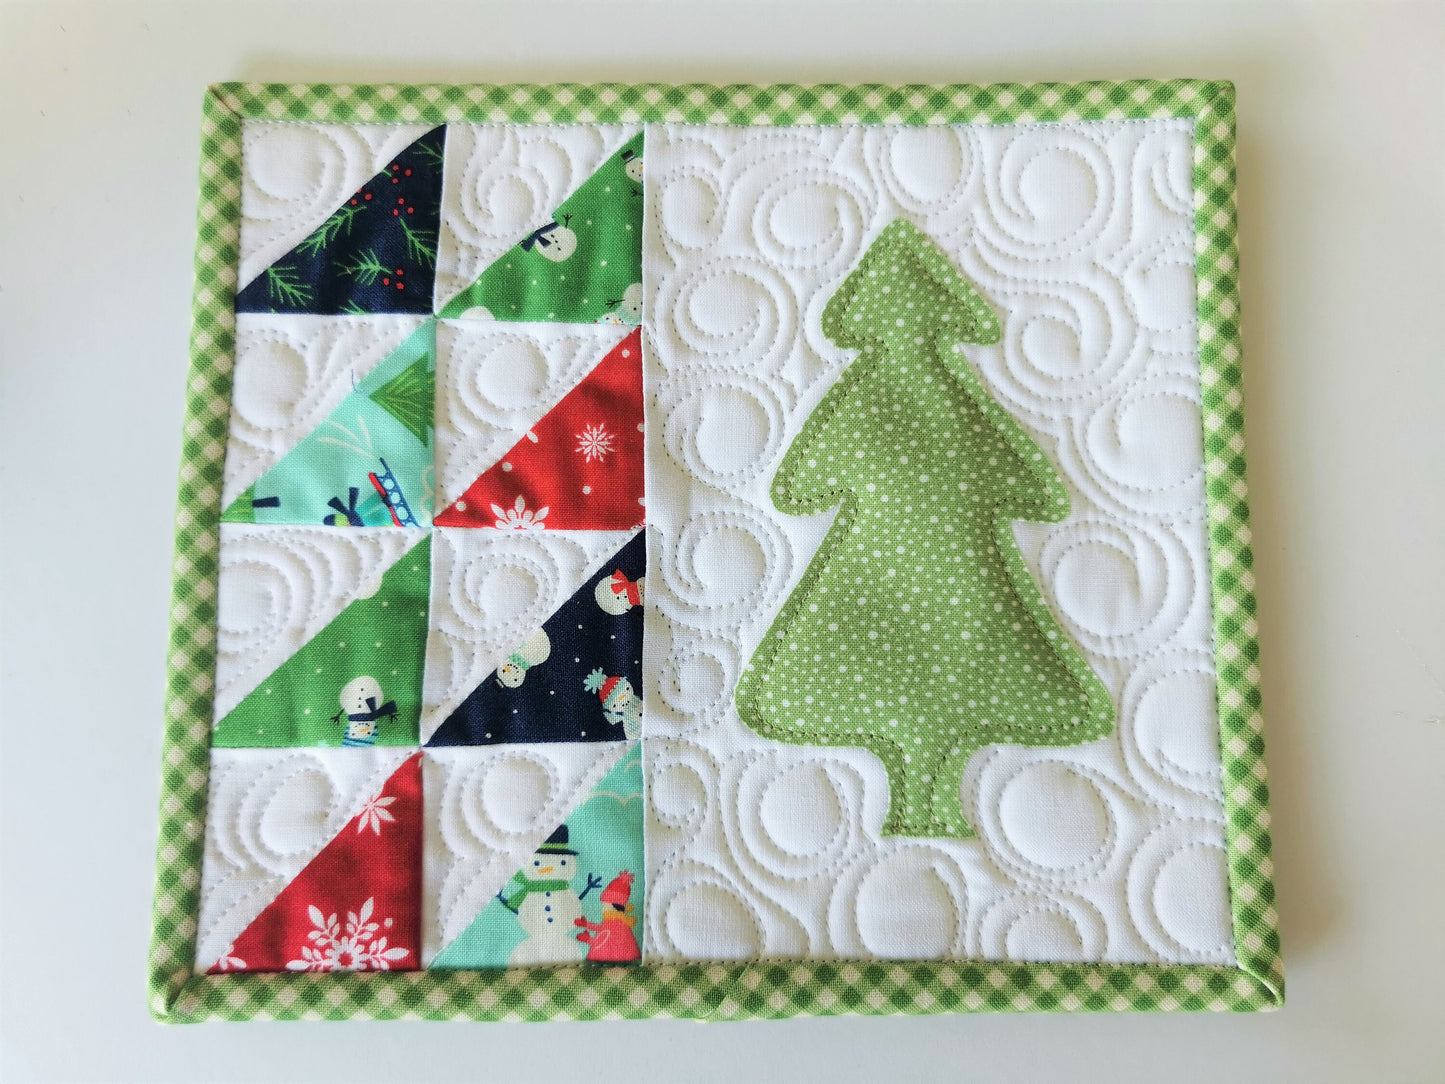 quilted evergreen tree mug rug with scrappy patchwork in winter theme fabrics